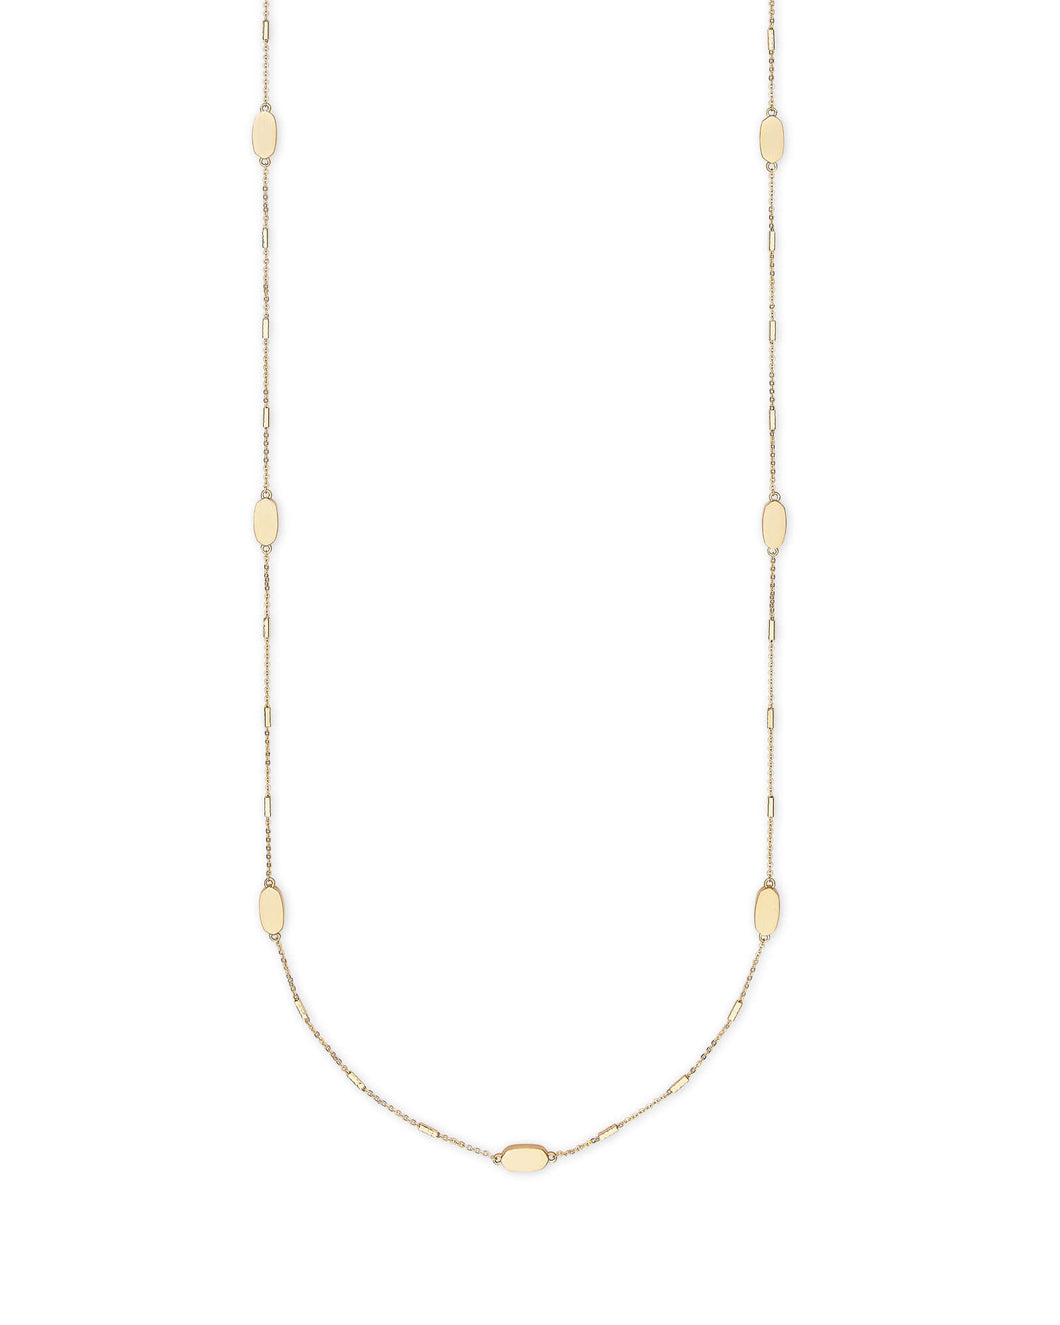 Franklin Long Necklace in Gold